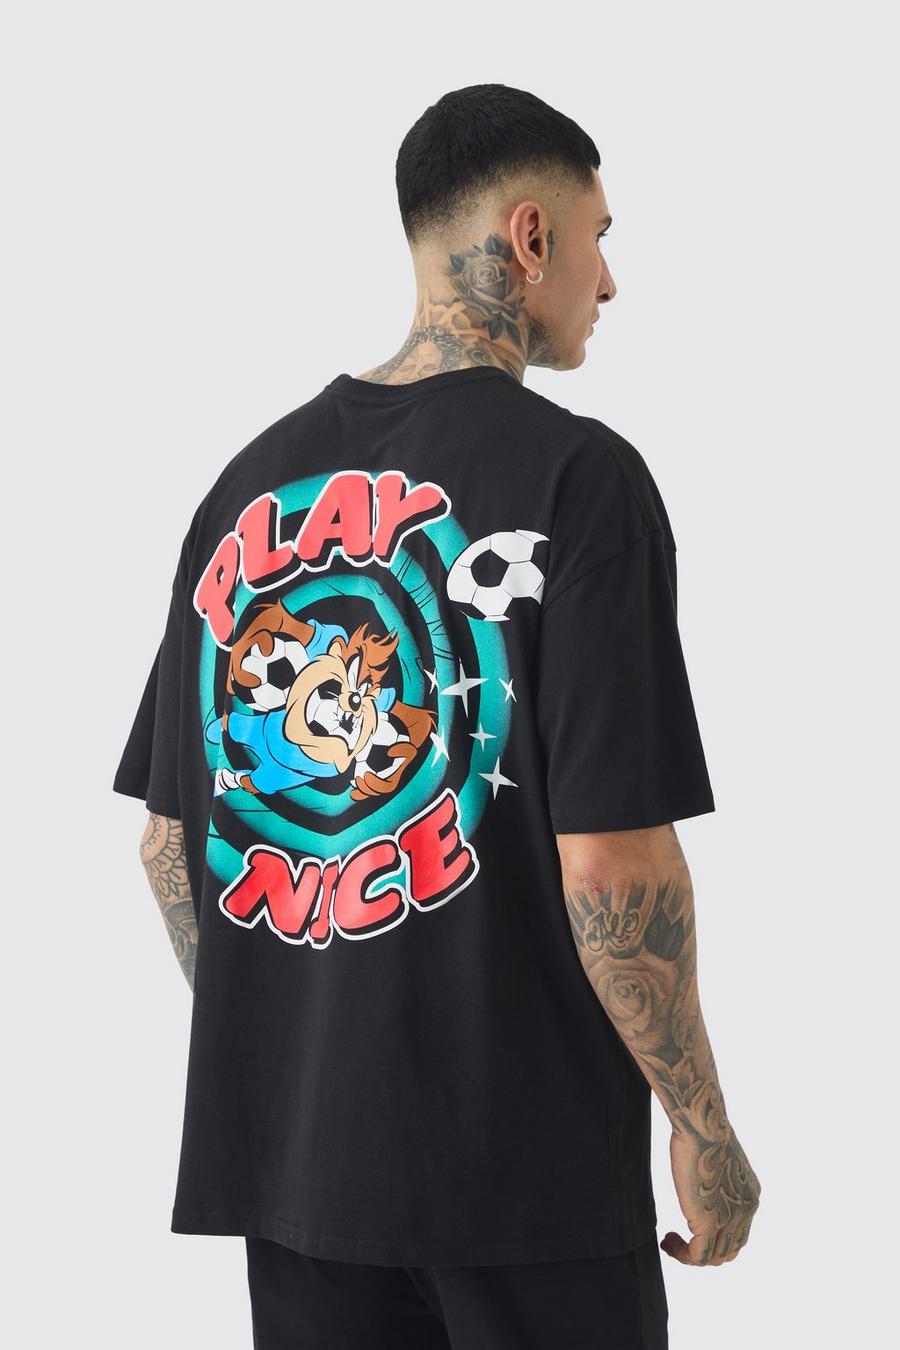 Tall Taz Play Nice T-shirt In Black image number 1